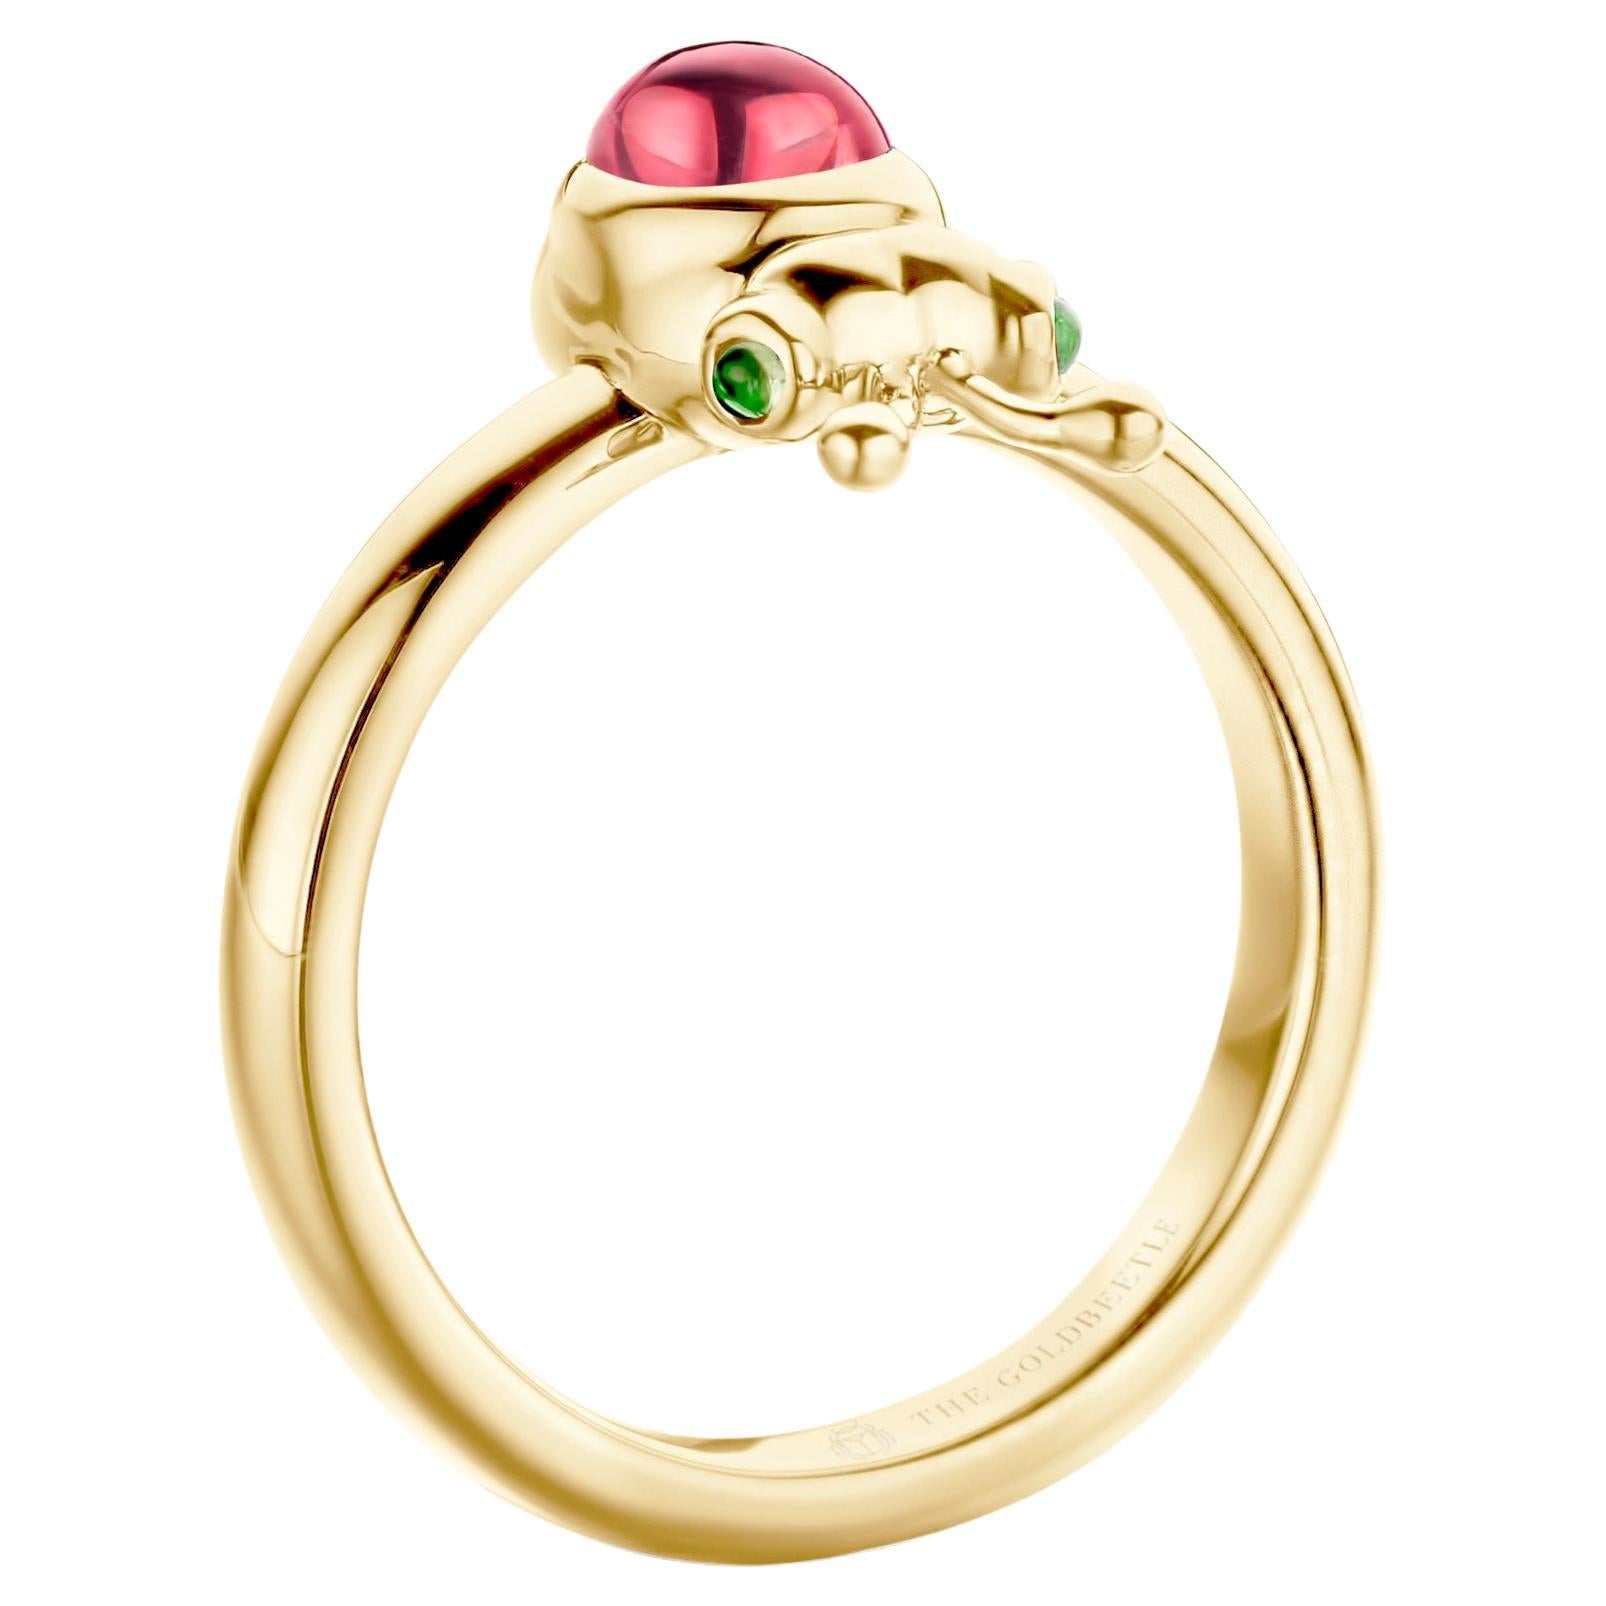 18-Karat yellow gold Lilou ring set with one natural pear-shaped cabochon pink Tourmaline and two natural tsavorites in round cabochon cut.
Celine Roelens, a goldsmith and gemologist, specializes in unique, fine jewelry, handmade in Belgium and